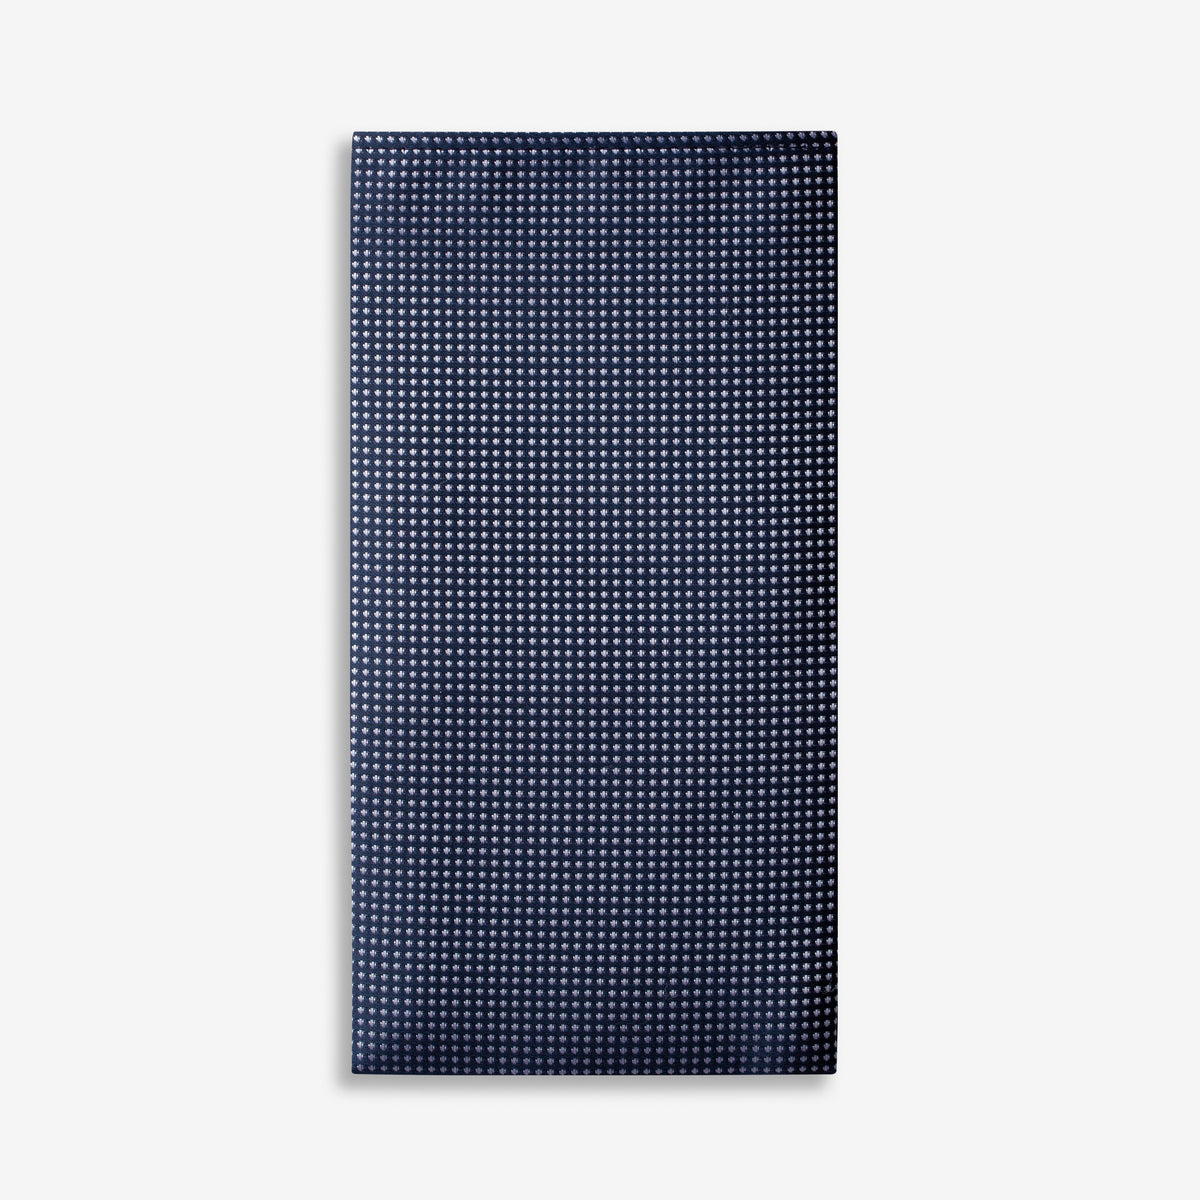 Reflective Navy Dotted Pocket Square